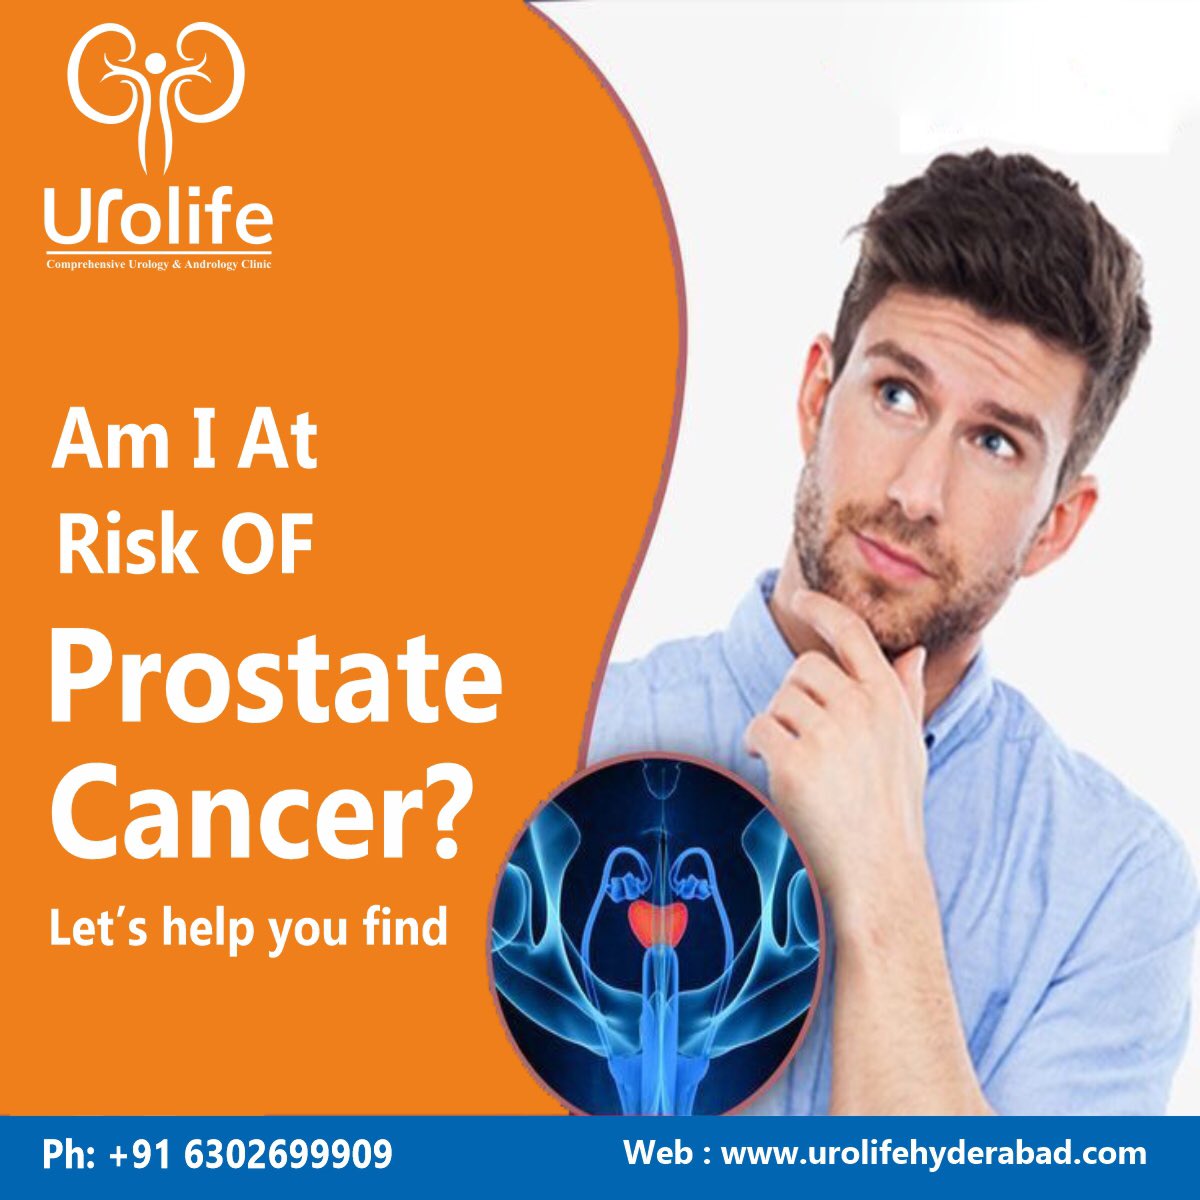 Am I at risk of prostate cancer?

Book an Appointment now for the Best Prostate Cancer treatment in Hyderabad

#PROSTATE #ProstateCancer #ProstateCancerTreatment #ProstateCancerAwarenessMonth #prostatecancersymptoms #urolife #urologycancer #urologycancersurgery #Hyderabad